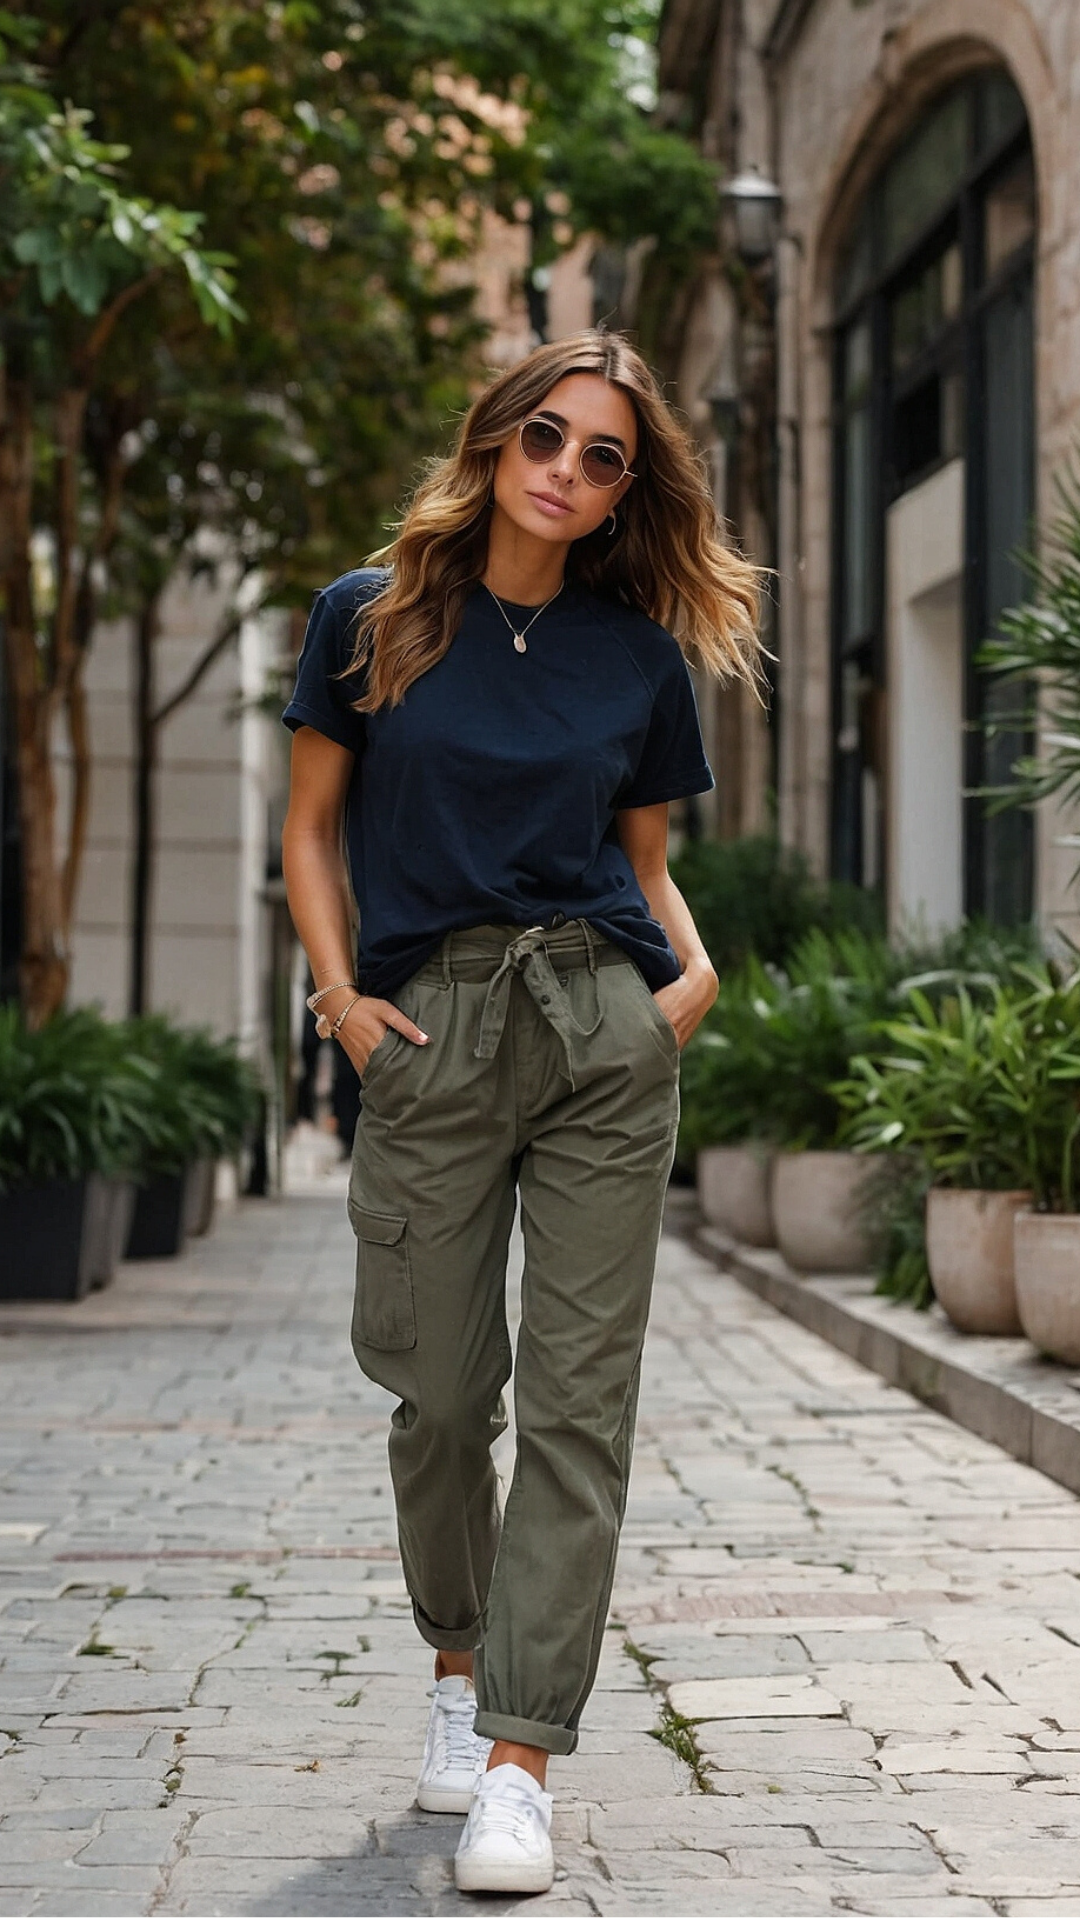 Stylish Comfort: Women's Relaxed Fits for the Street